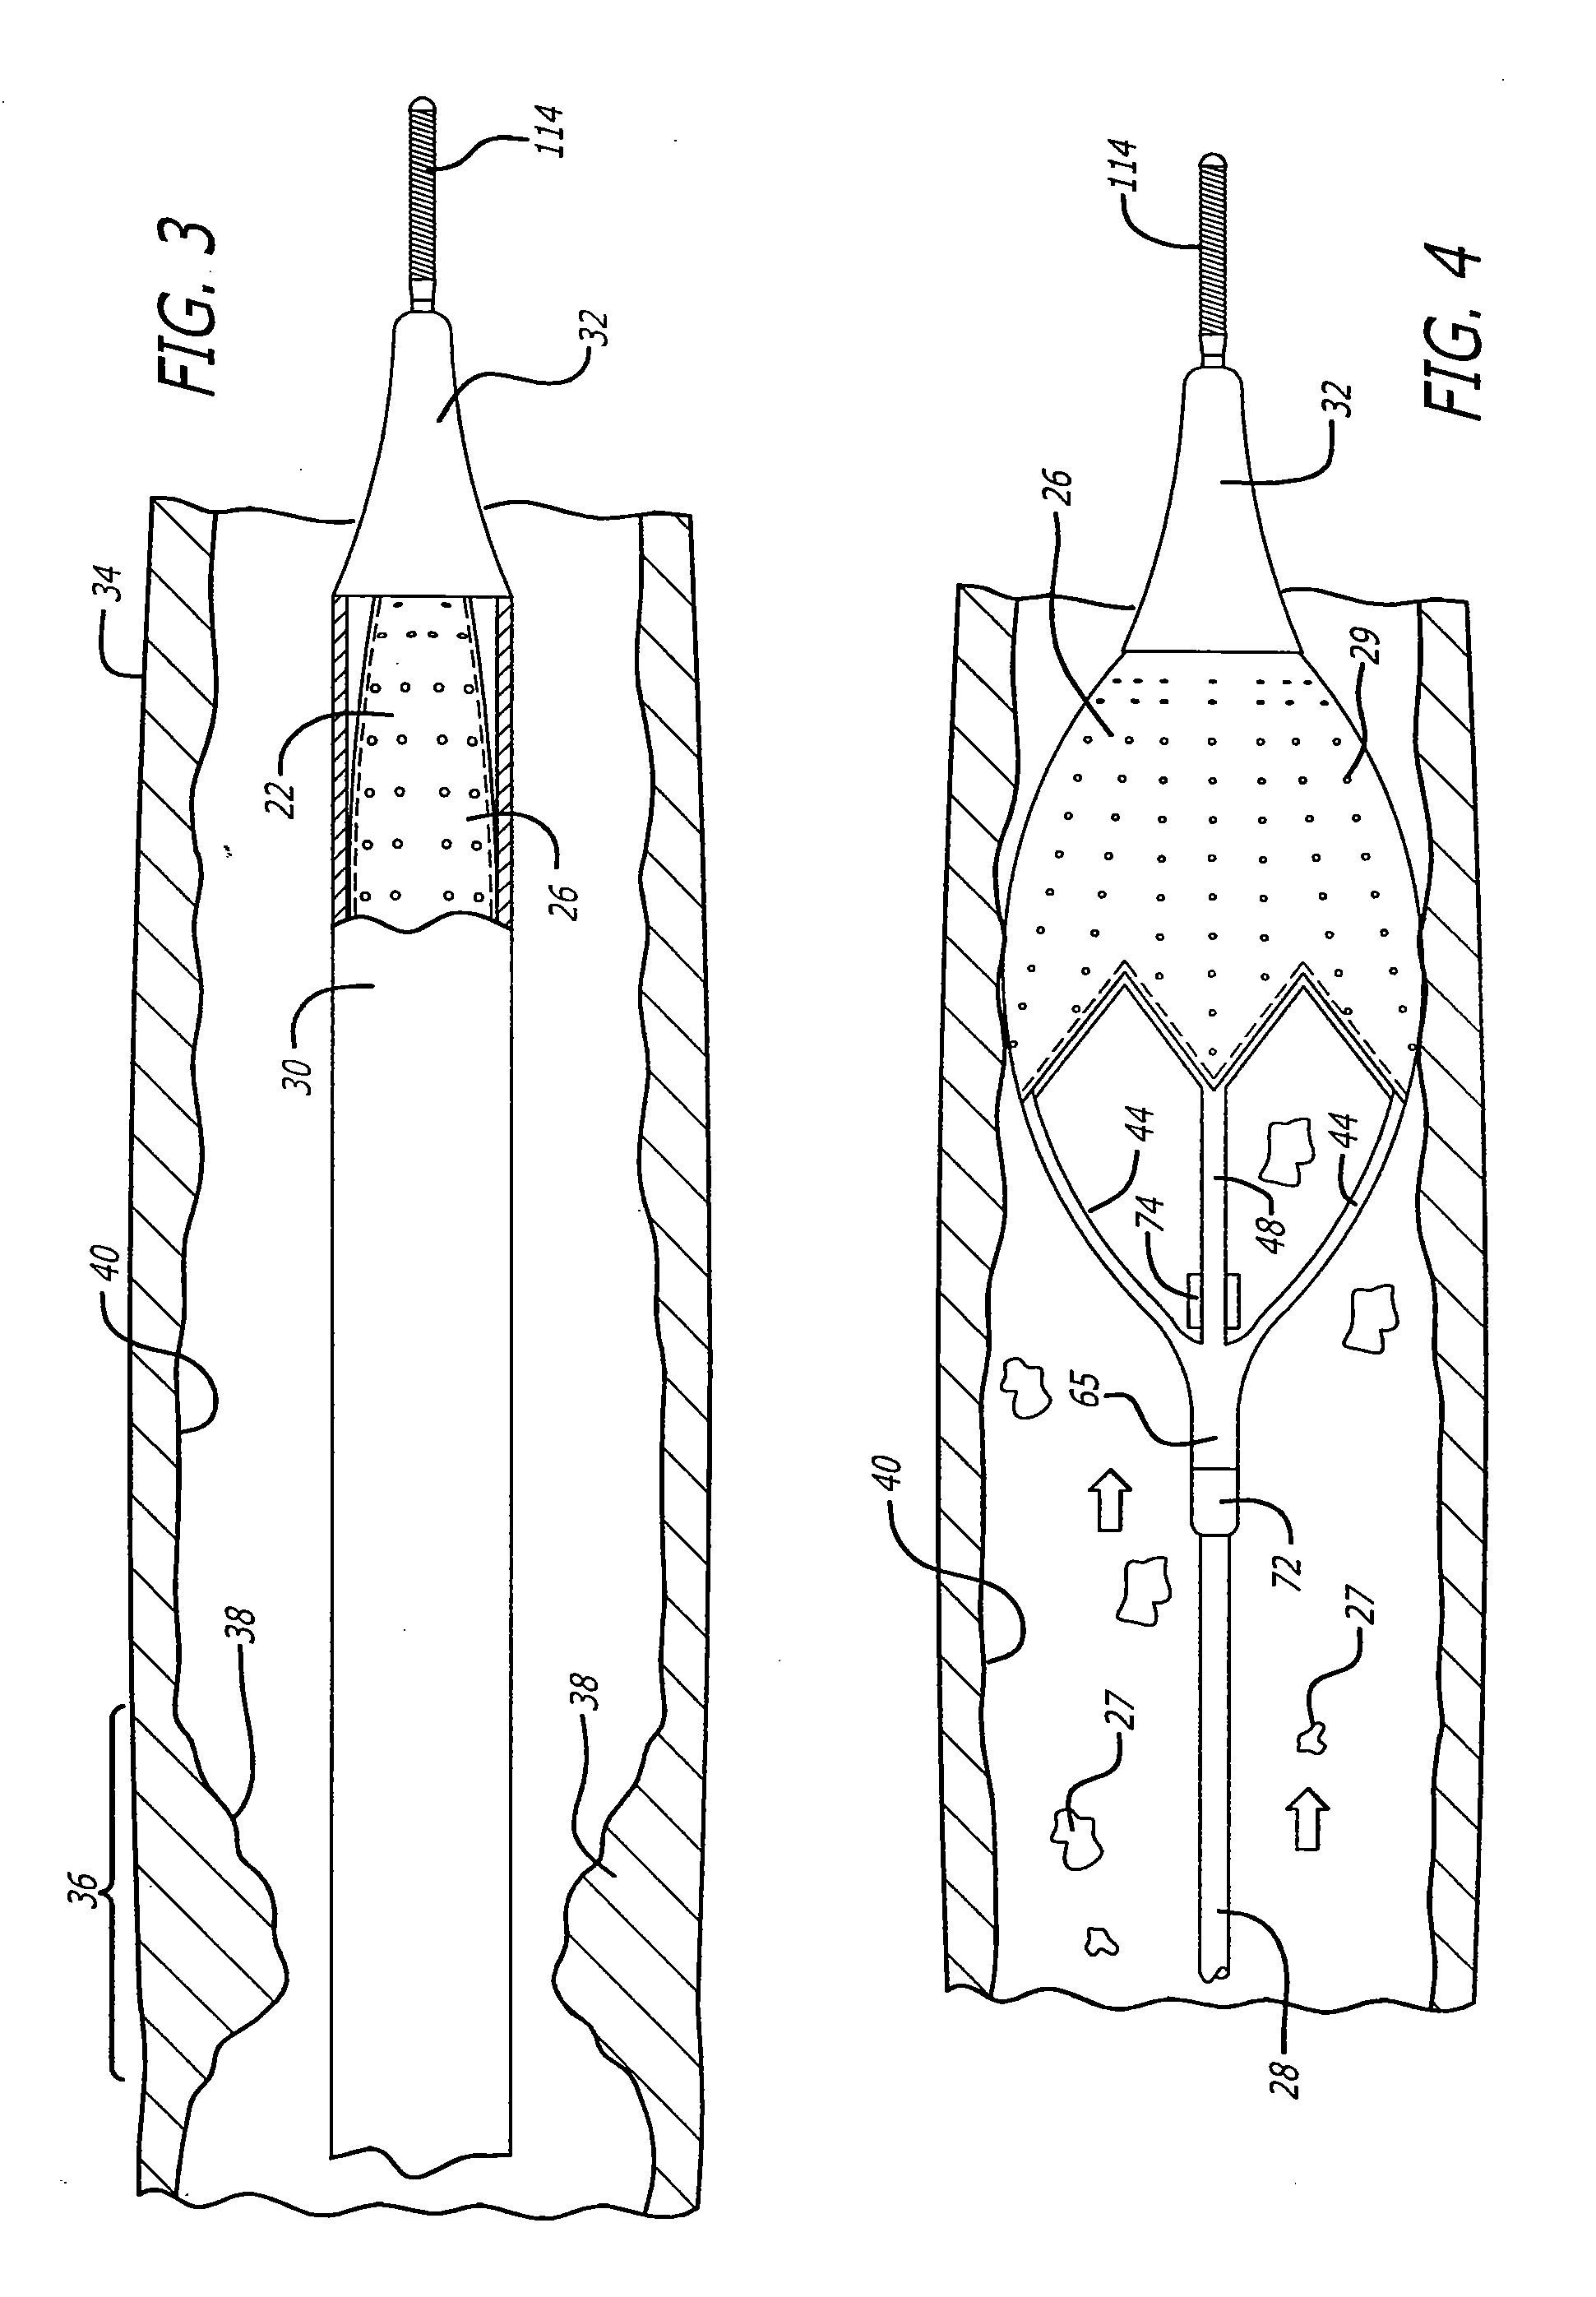 Expandable cages for embolic filtering devices